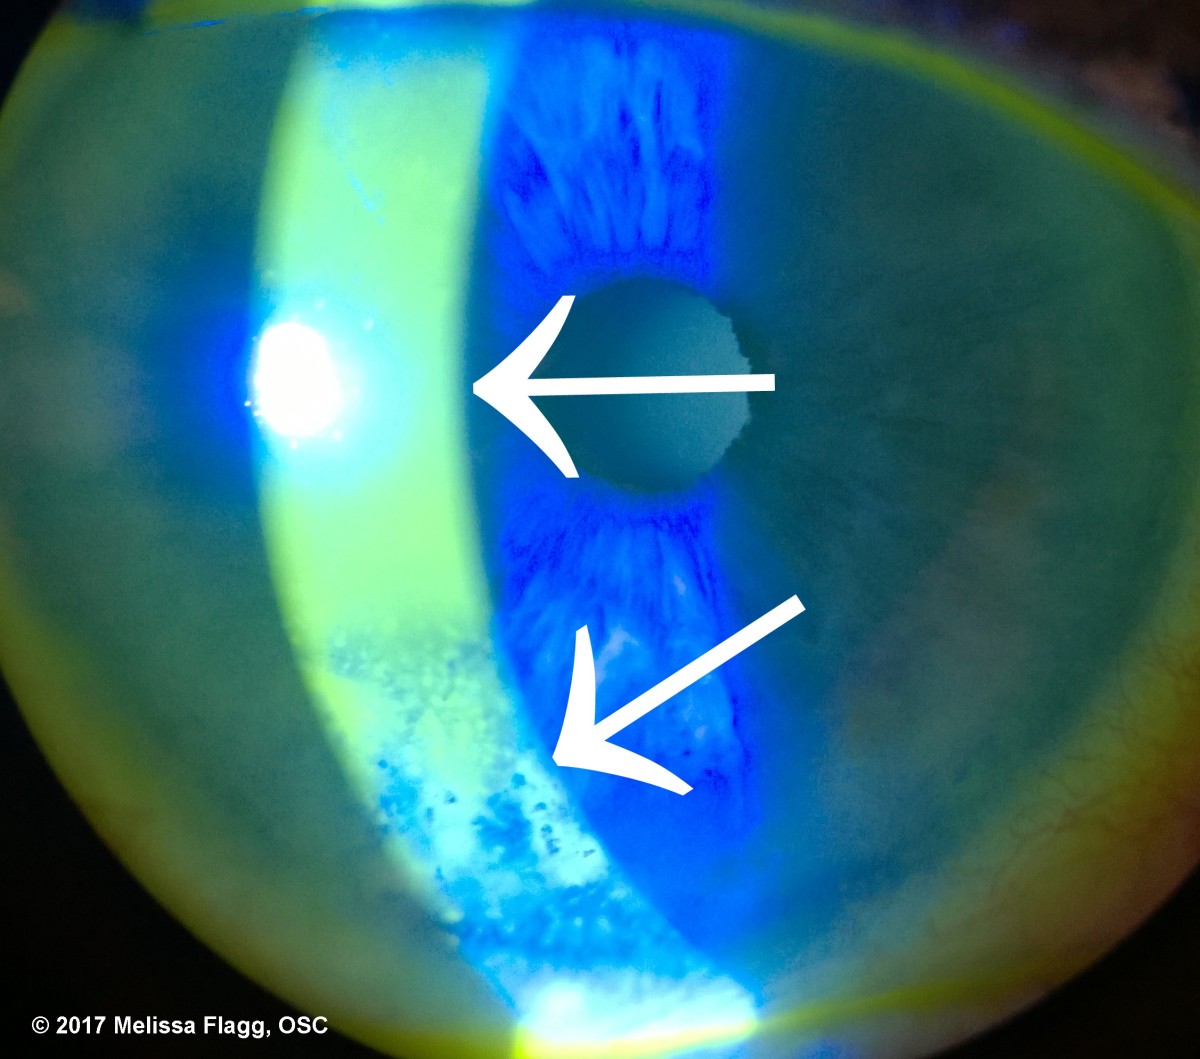 An image showing how dryness affects the eye. The first arrow points to the smooth tear film, coating the cornea properly. The second arrow shows what happens when the tear film is allowed to evaporate. 